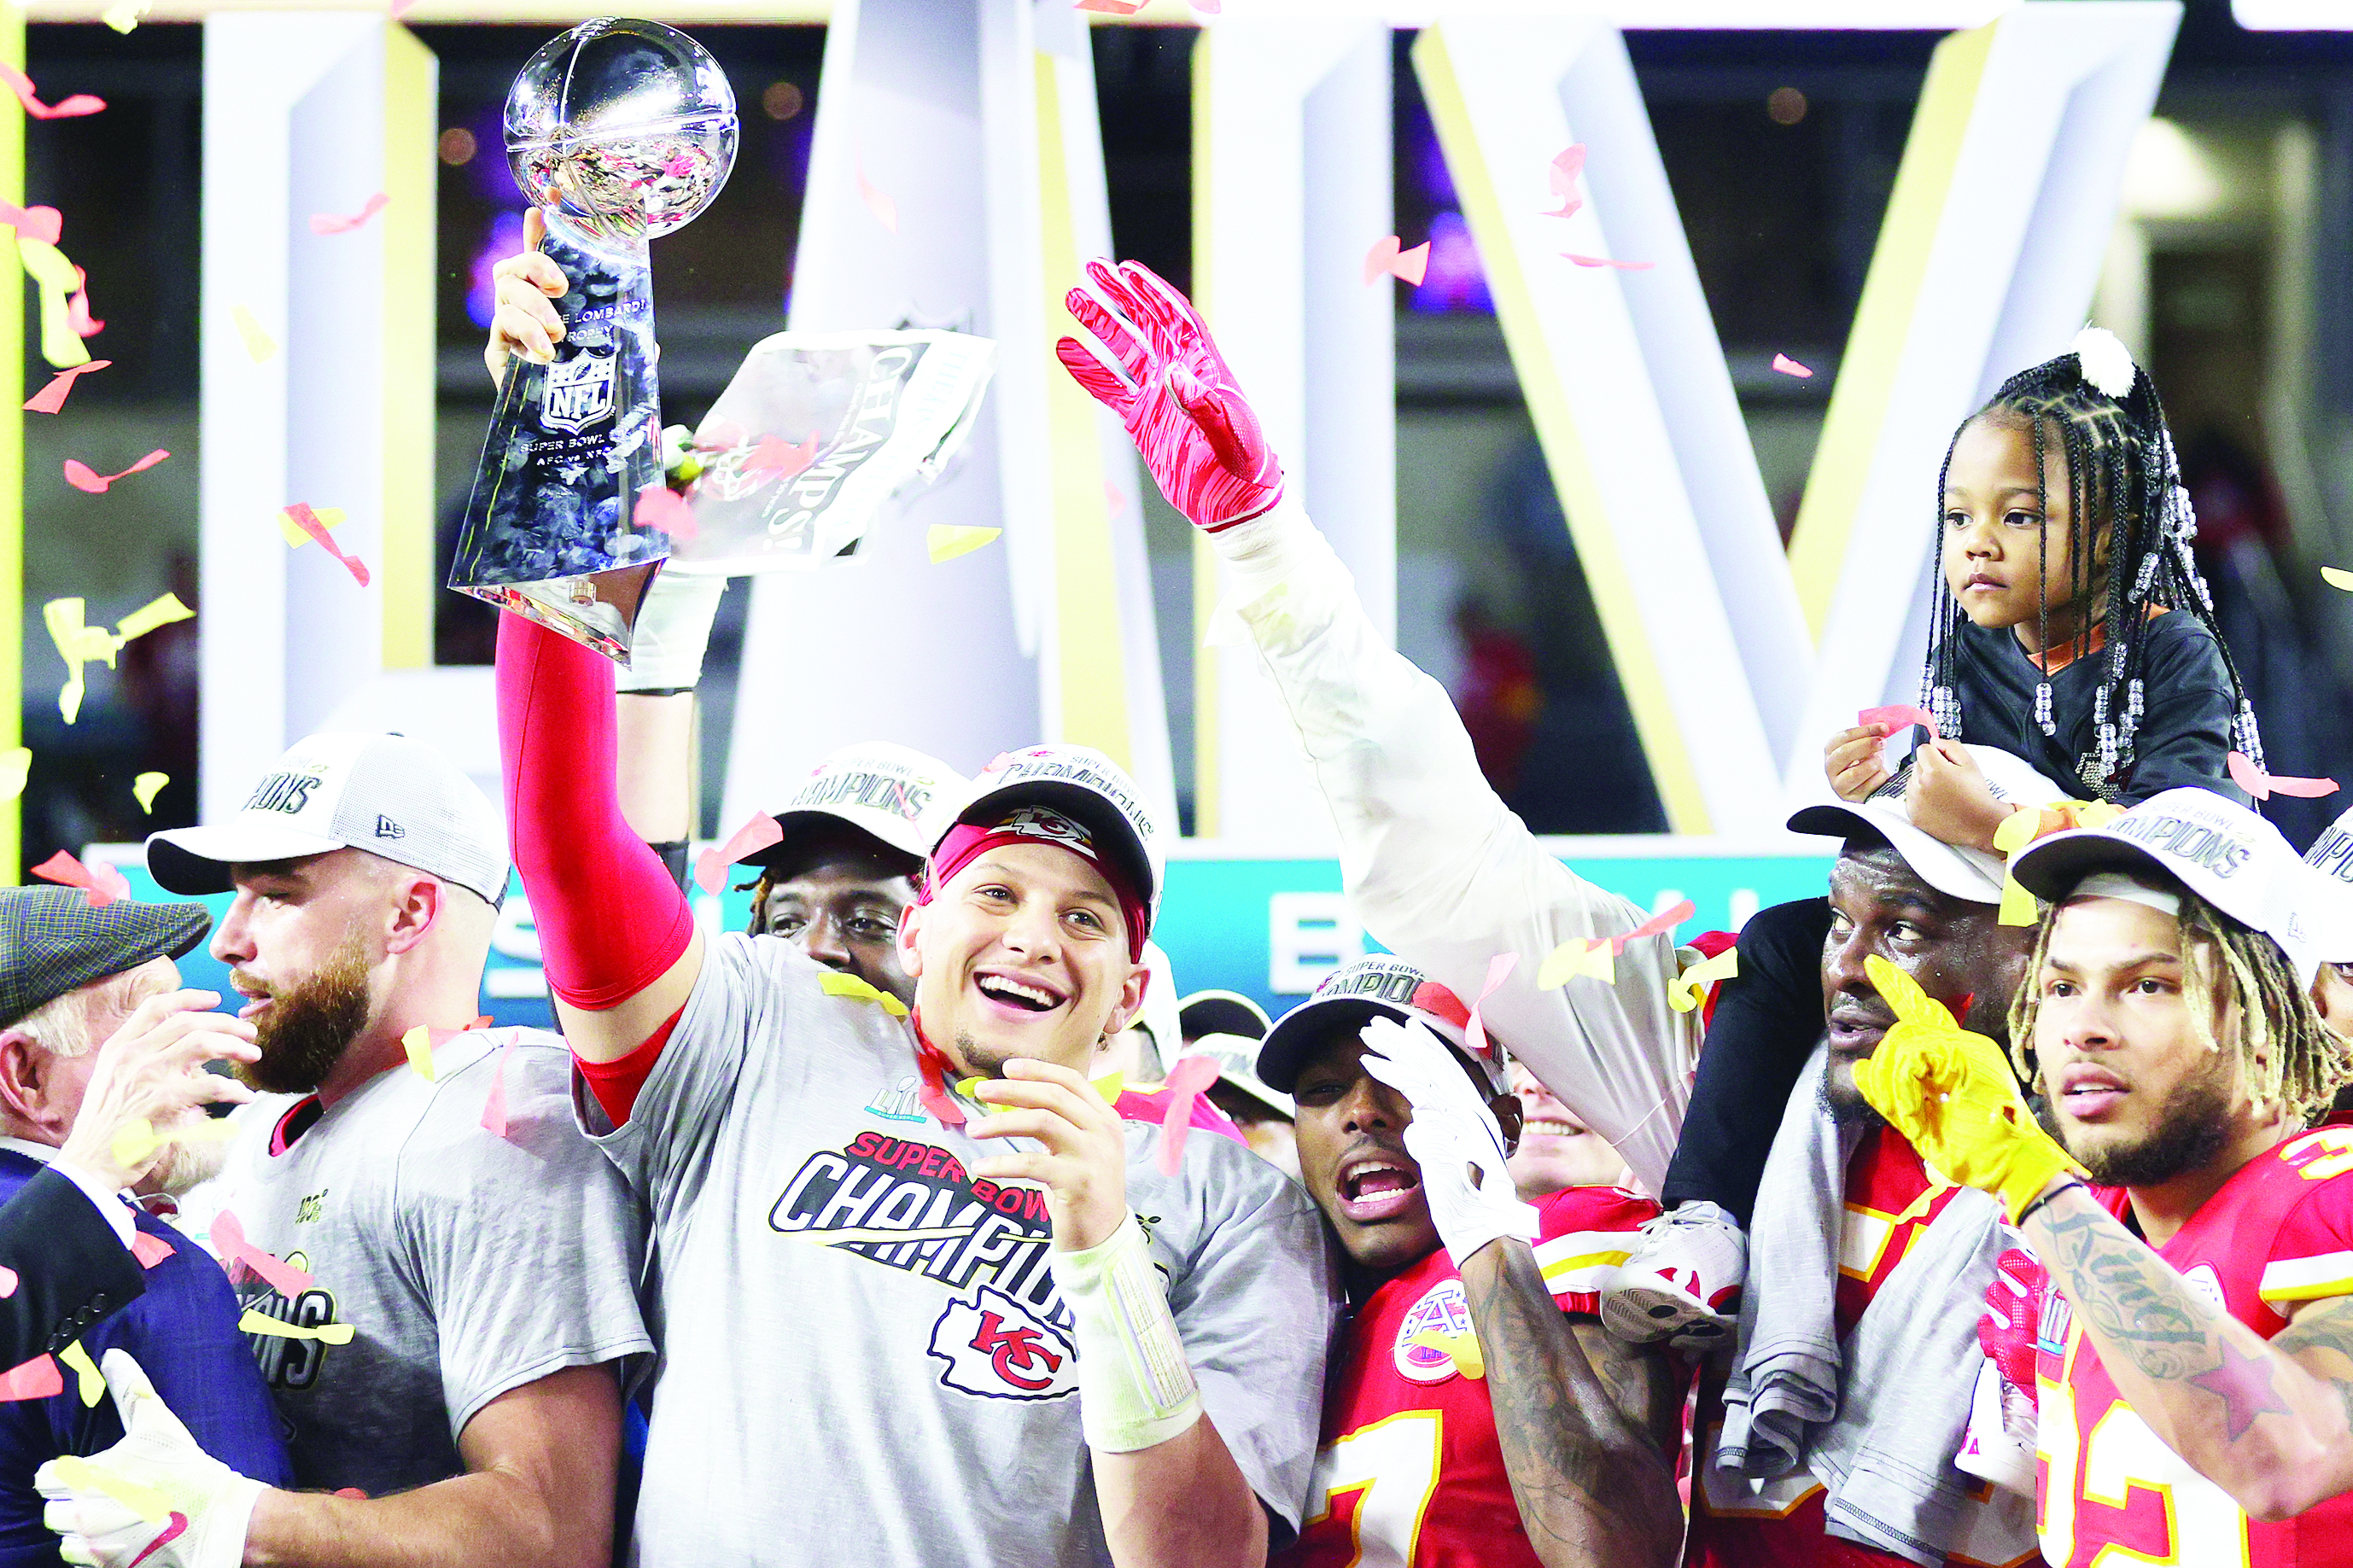 MIAMI, FLORIDA - FEBRUARY 02: Patrick Mahomes #15 of the Kansas City Chiefs raises the Vince Lombardi Trophy after defeating the San Francisco 49ers 31-20 in Super Bowl LIV at Hard Rock Stadium on February 02, 2020 in Miami, Florida.   Jamie Squire/Getty Images/AFP